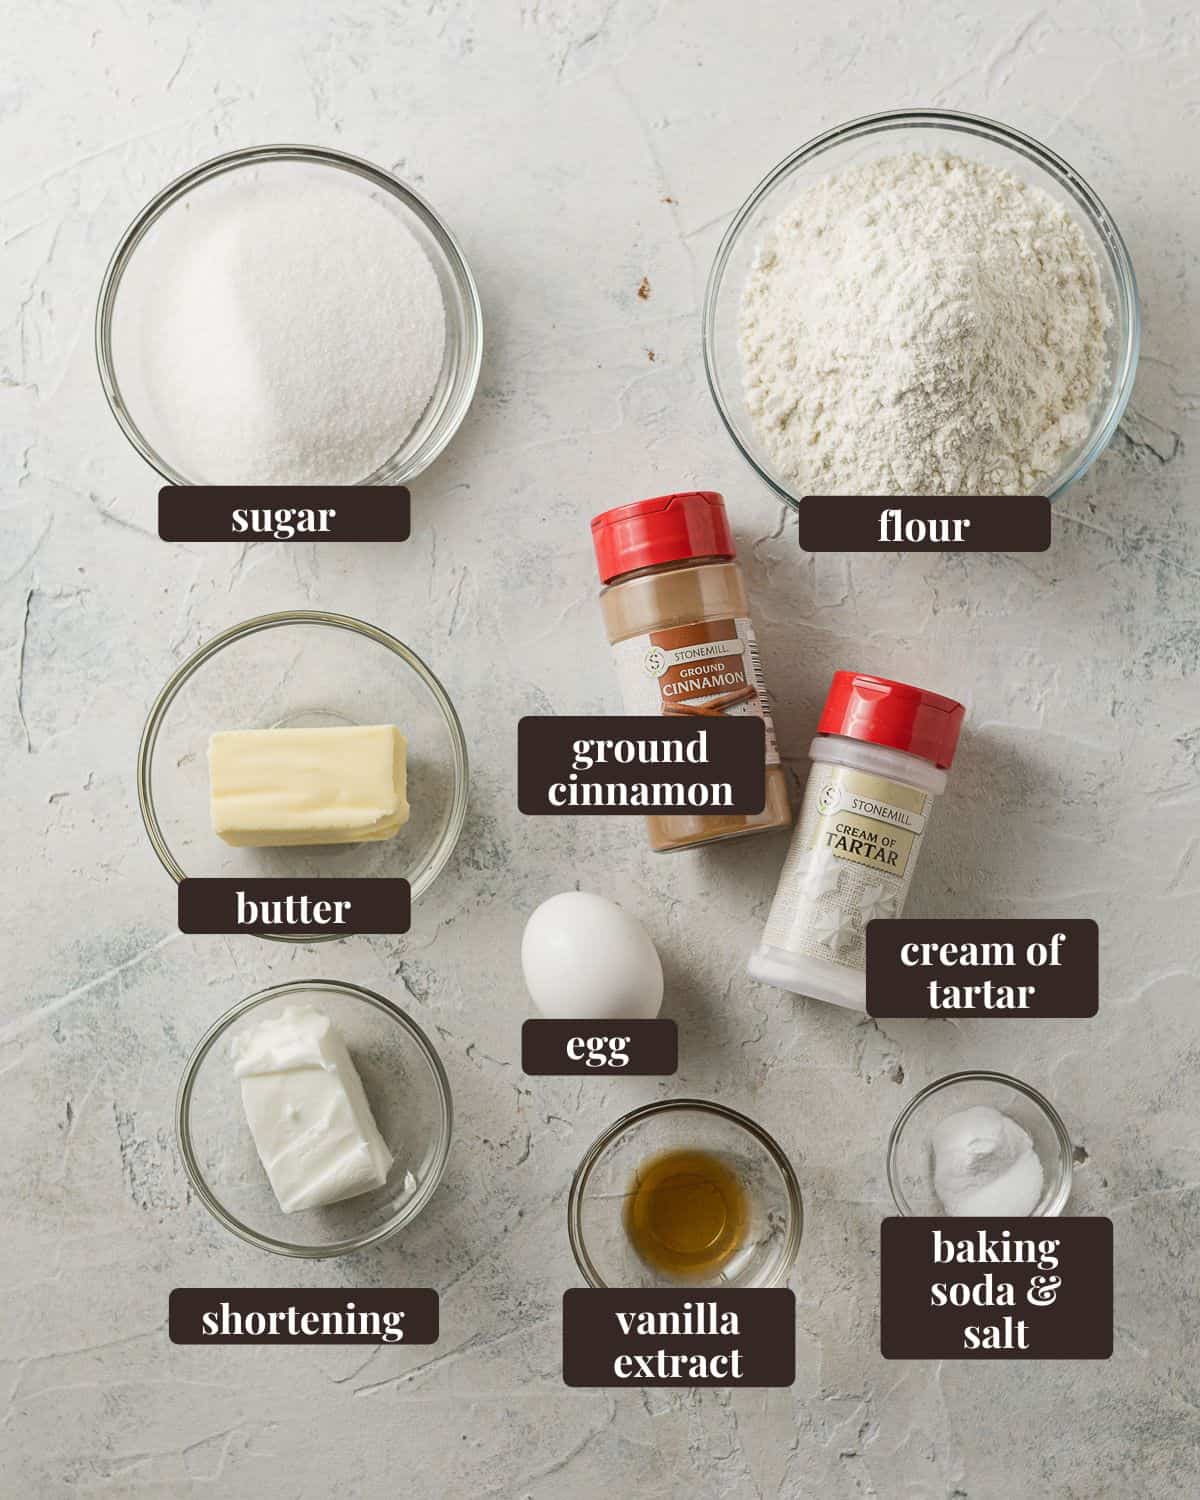 Labeled ingredients for Mini Snickerdoodle Cookies: sugar, flour, ground cinnamon, cream of tartar, baking soda & salt, vanilla extract, shortening, butter, and egg.